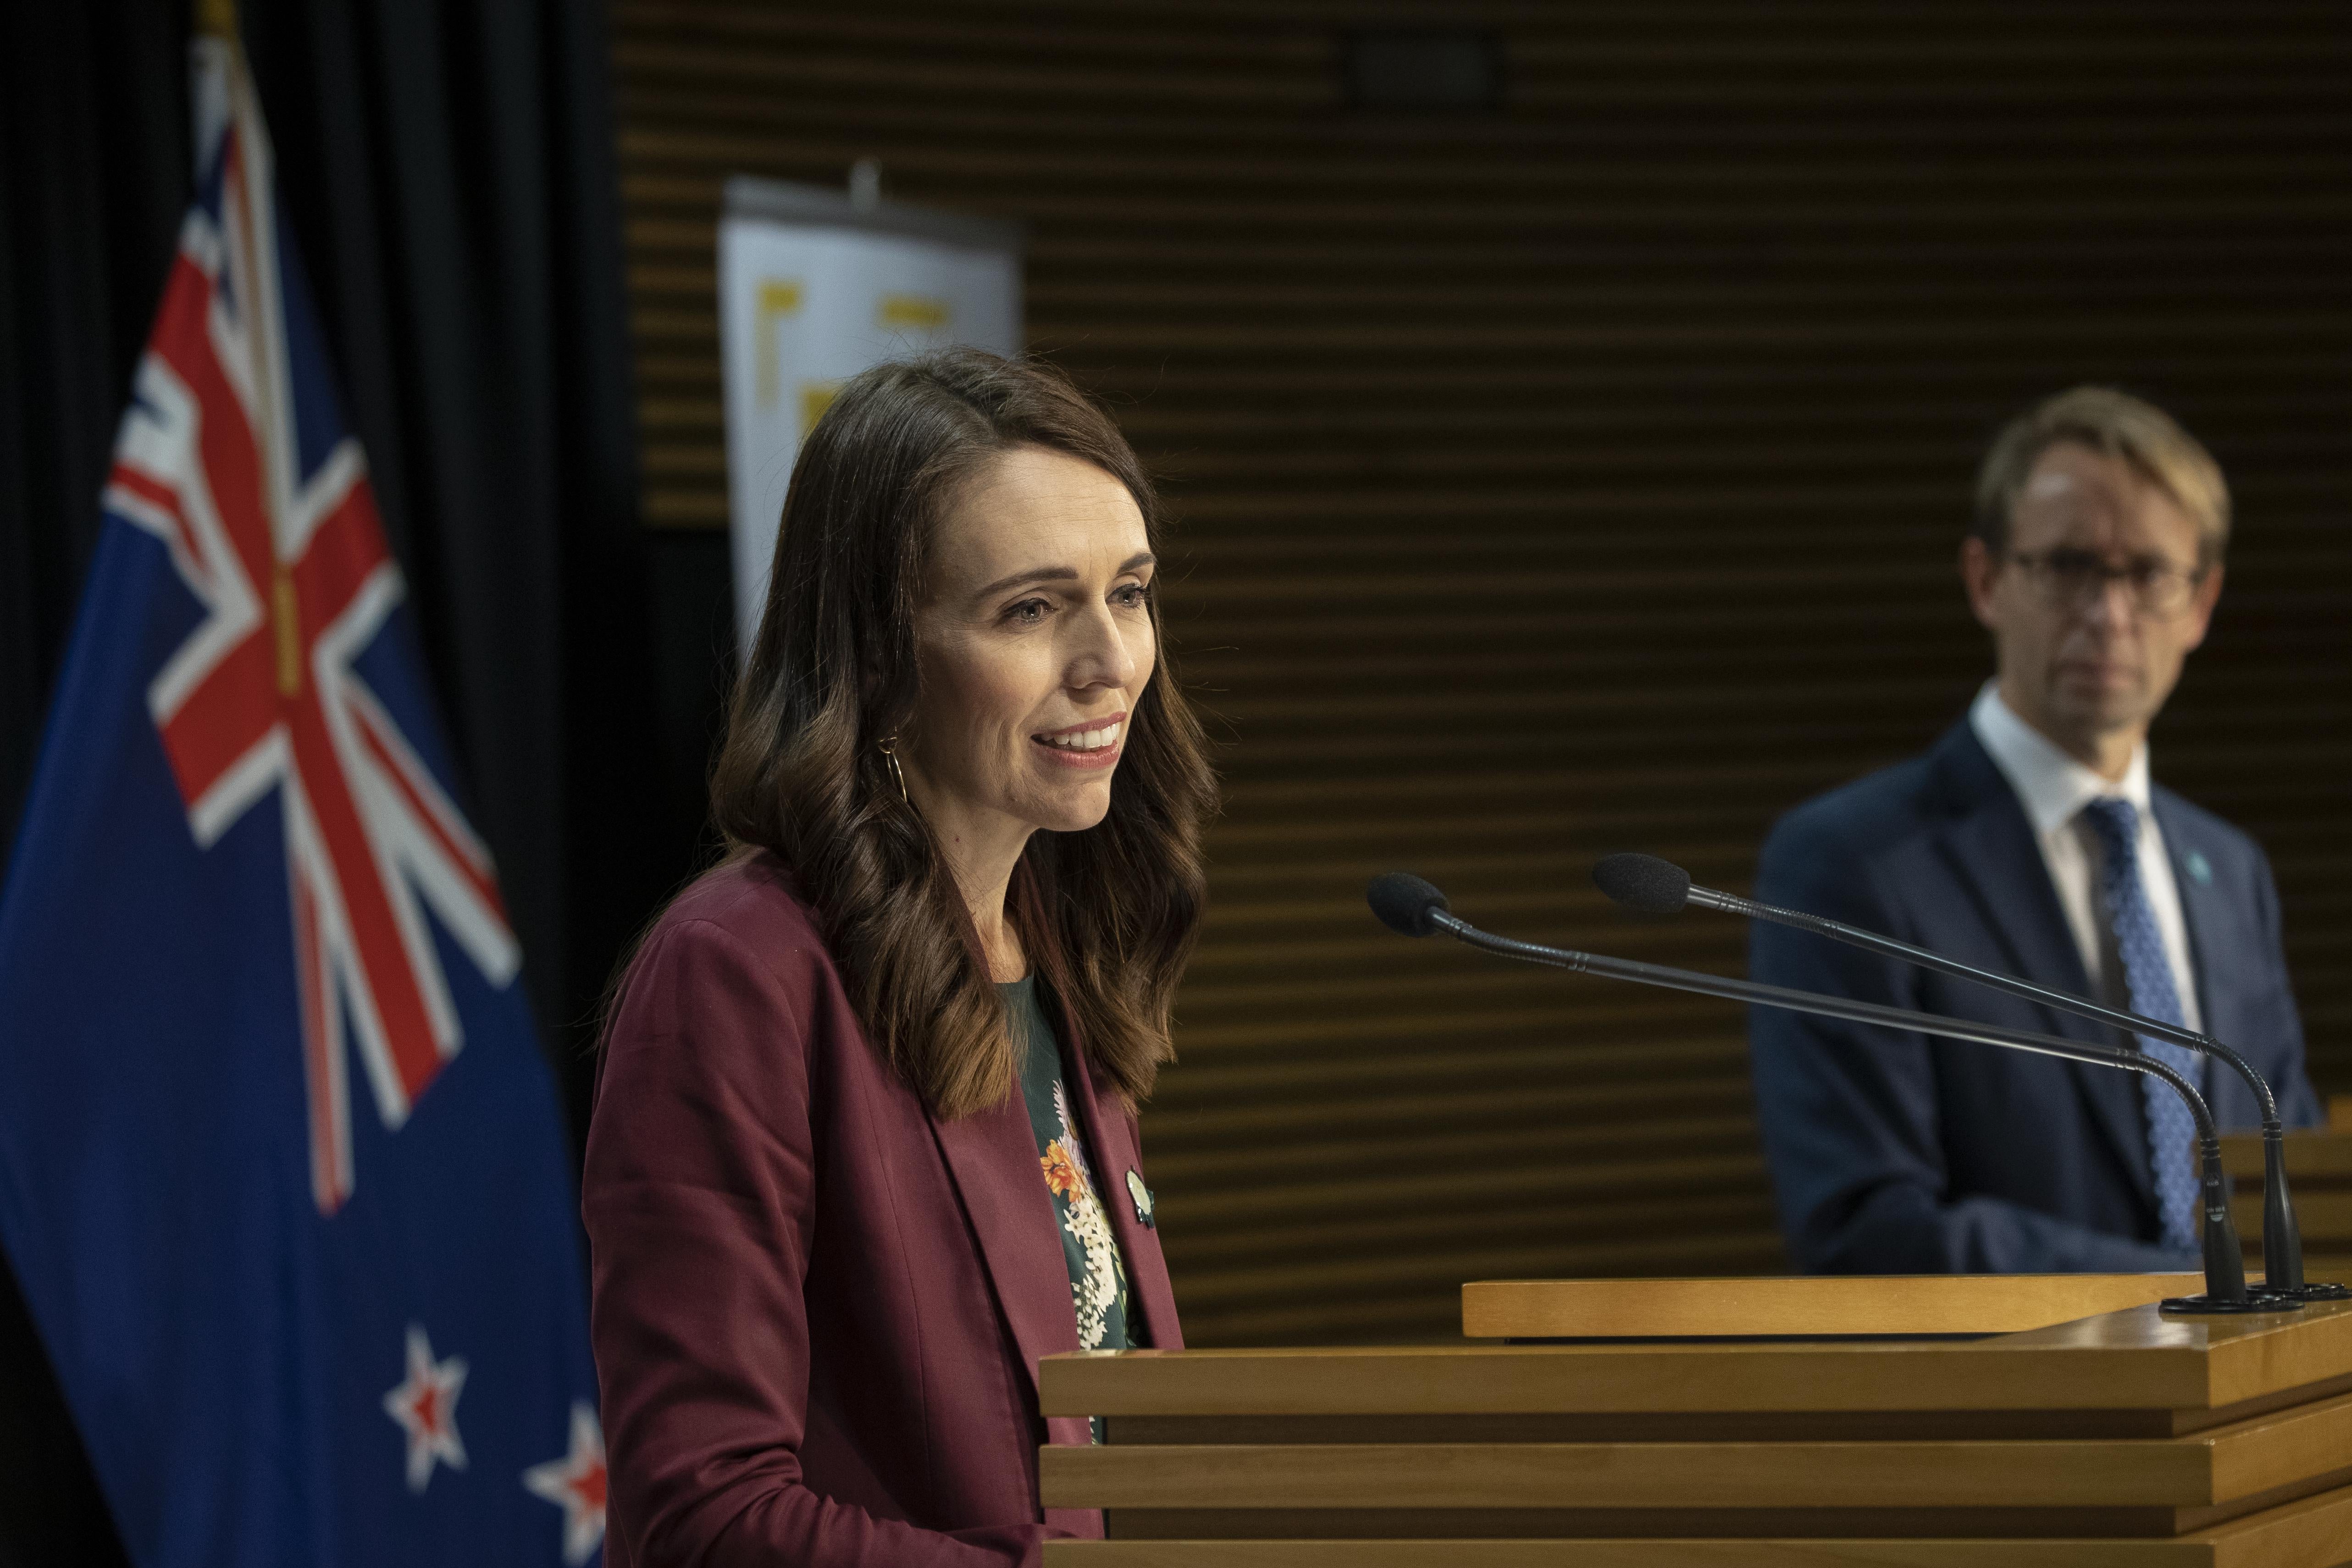 Jacinda Ardern speaks at a podium. Behind her is the New Zealand flag.